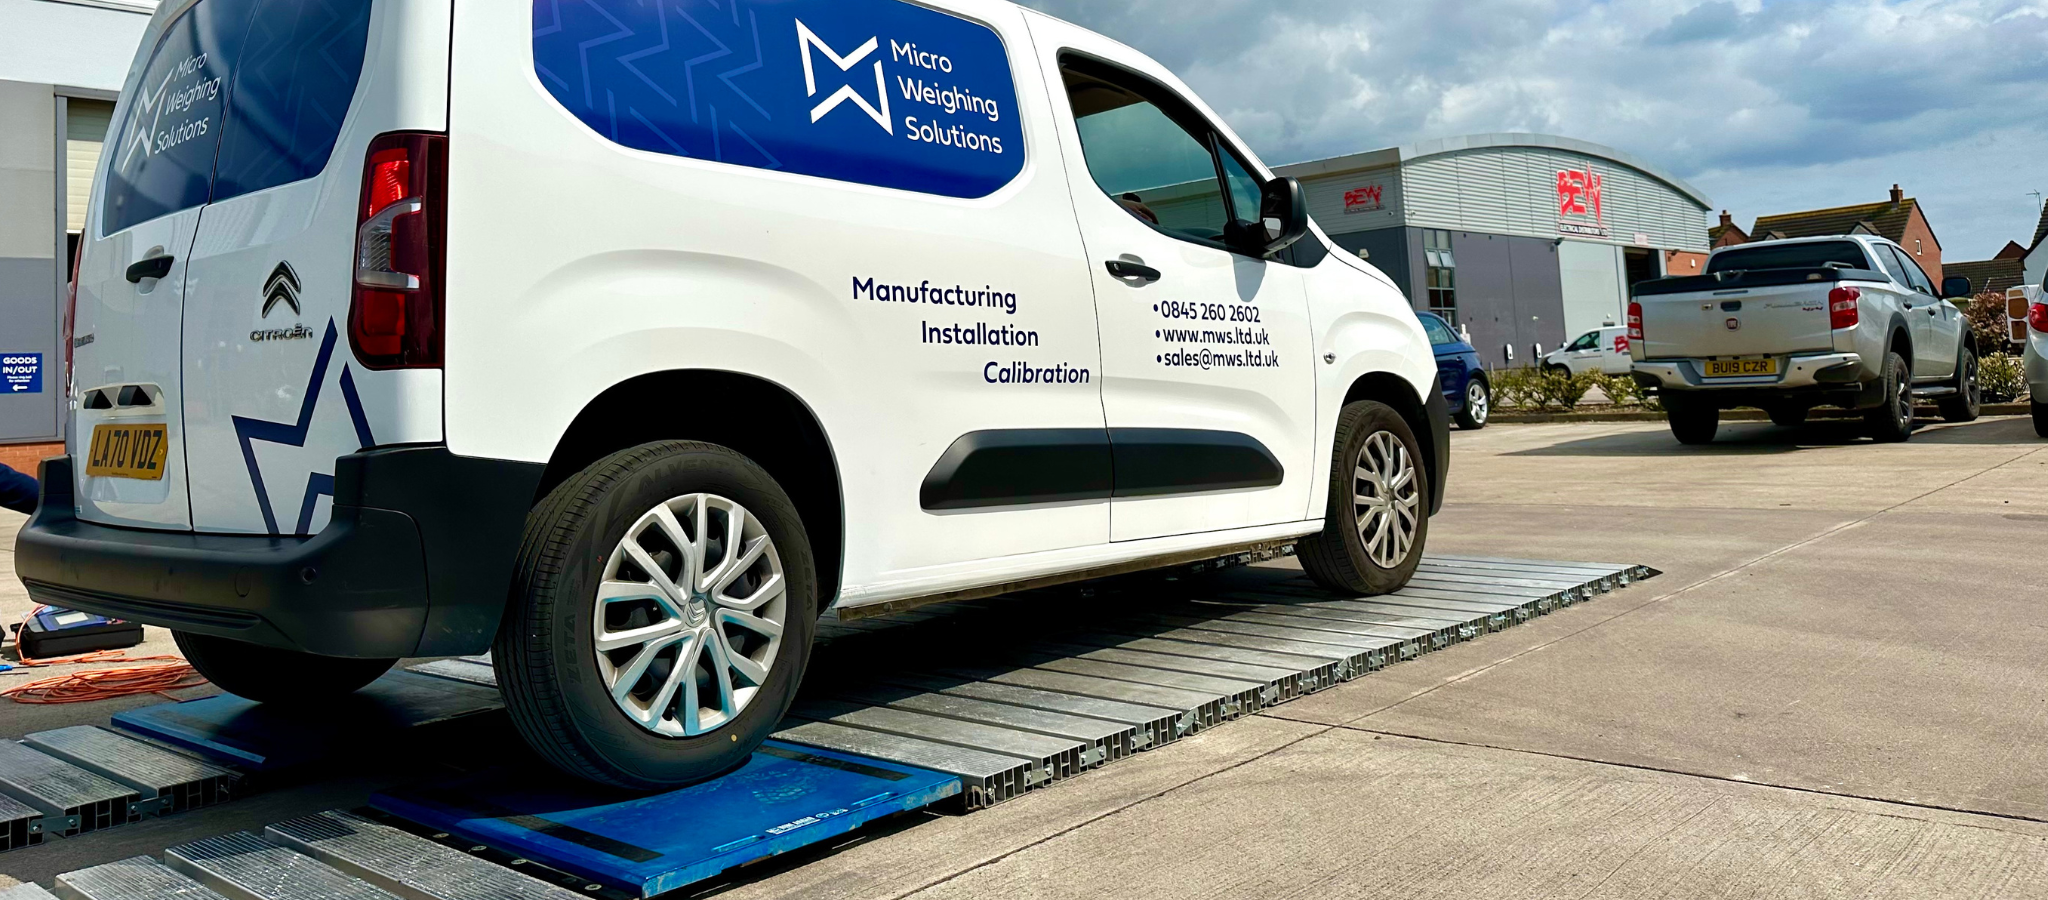 VCA Update: New UKAS Calibration Requirements for weighing Vans & Lorries Explained (and How to Stay Compliant) 